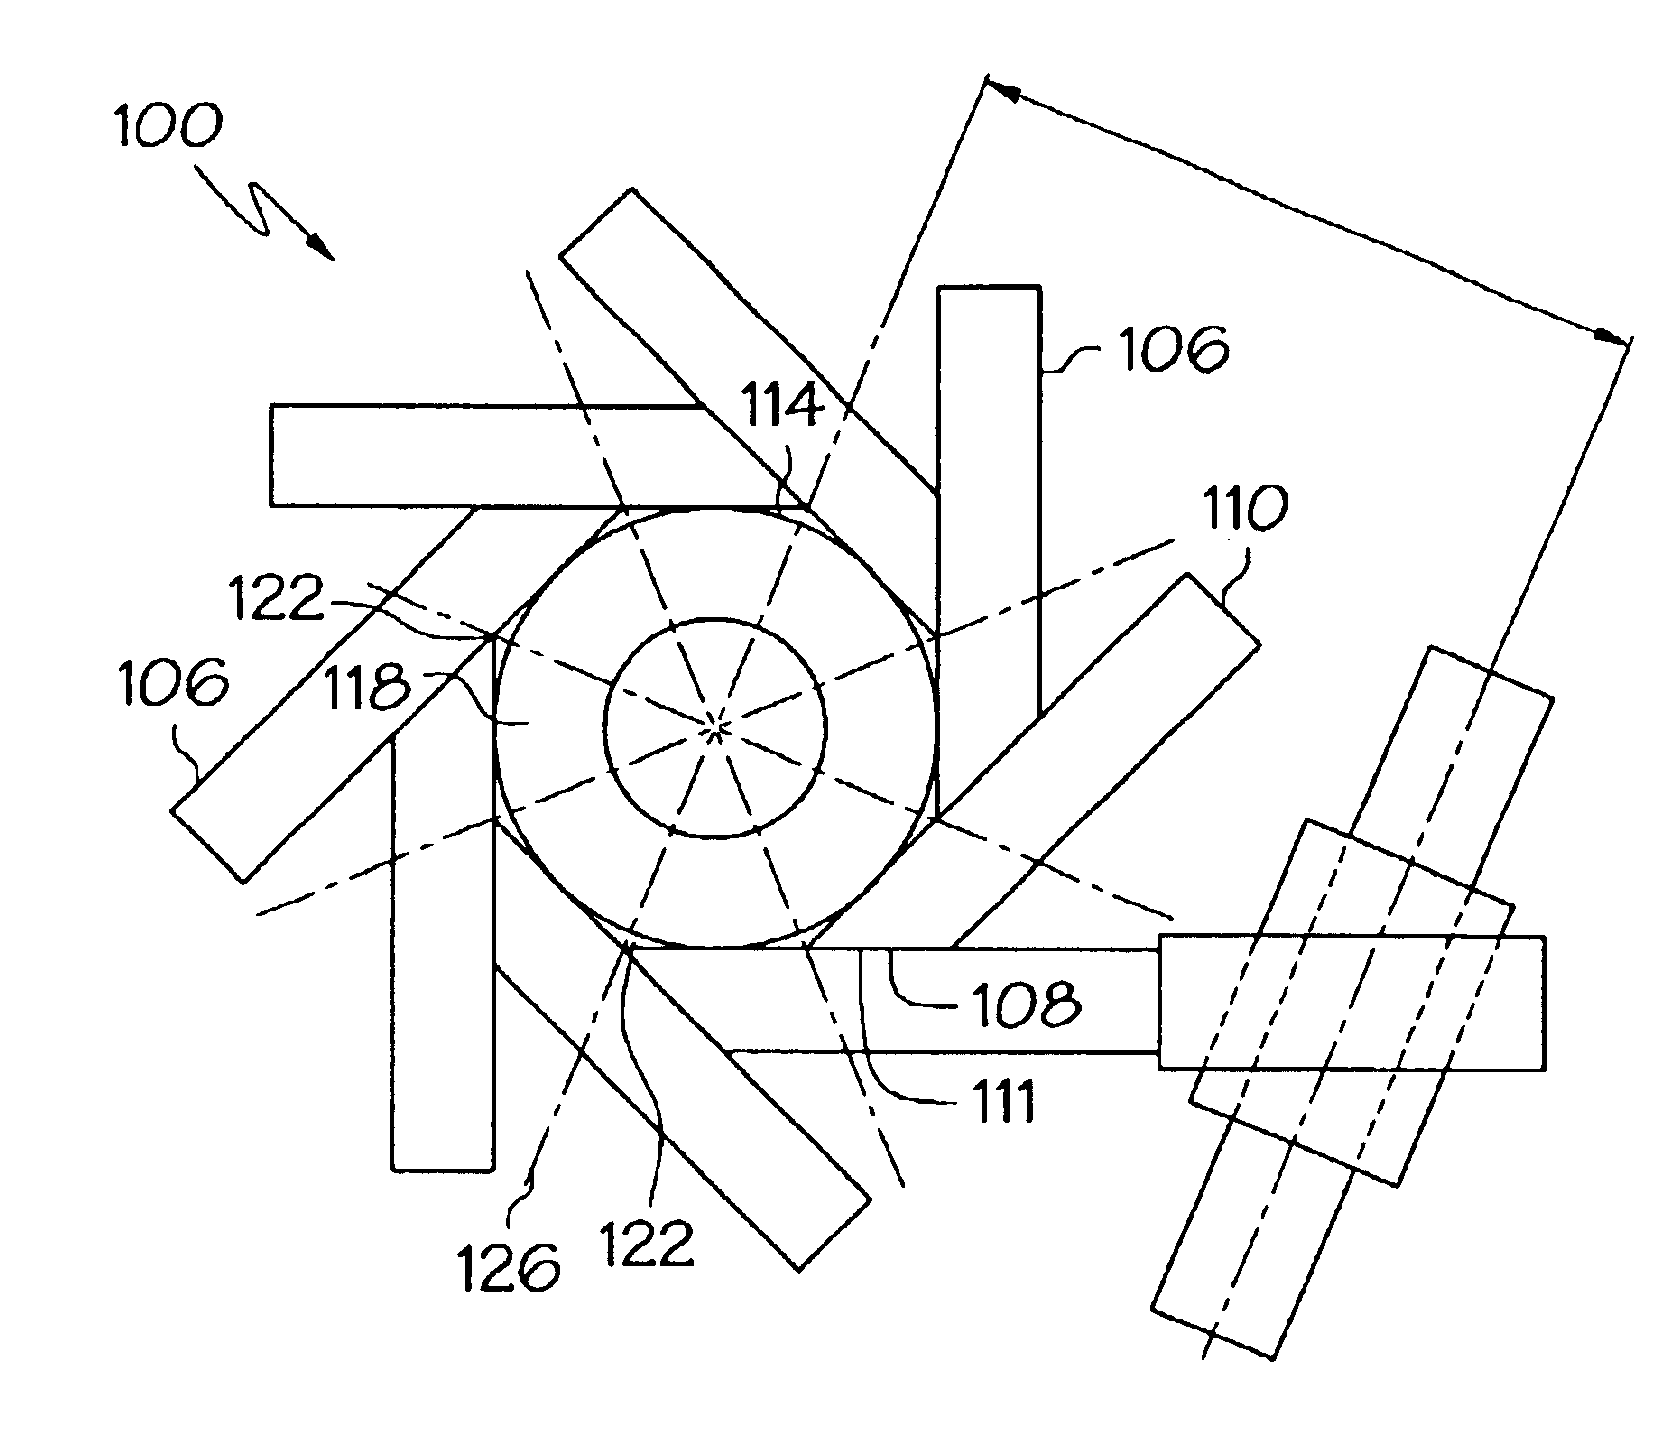 Apparatus for contracting, loading or crimping self-expanding and balloon expandable stent devices